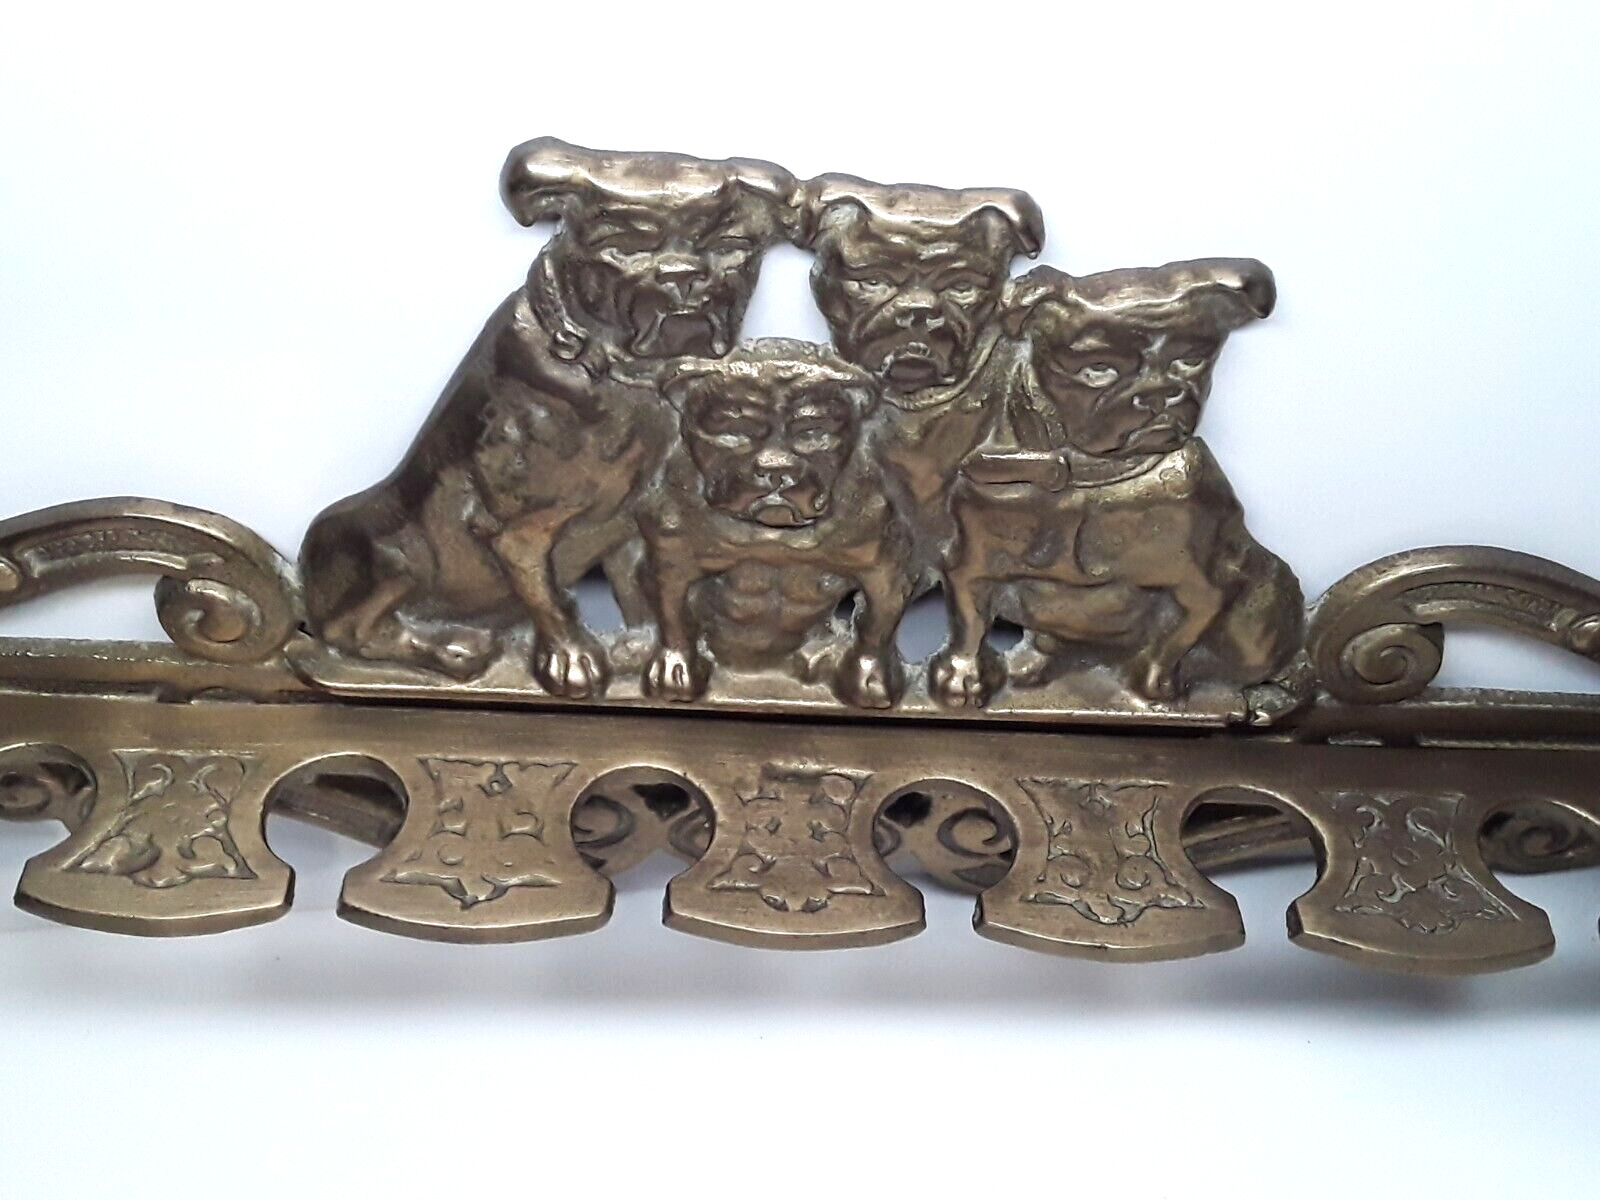 Vintage Bulldogs Cast Brass Wall Mount For Tobacco Smoking Pipes Holds 6 / RARE